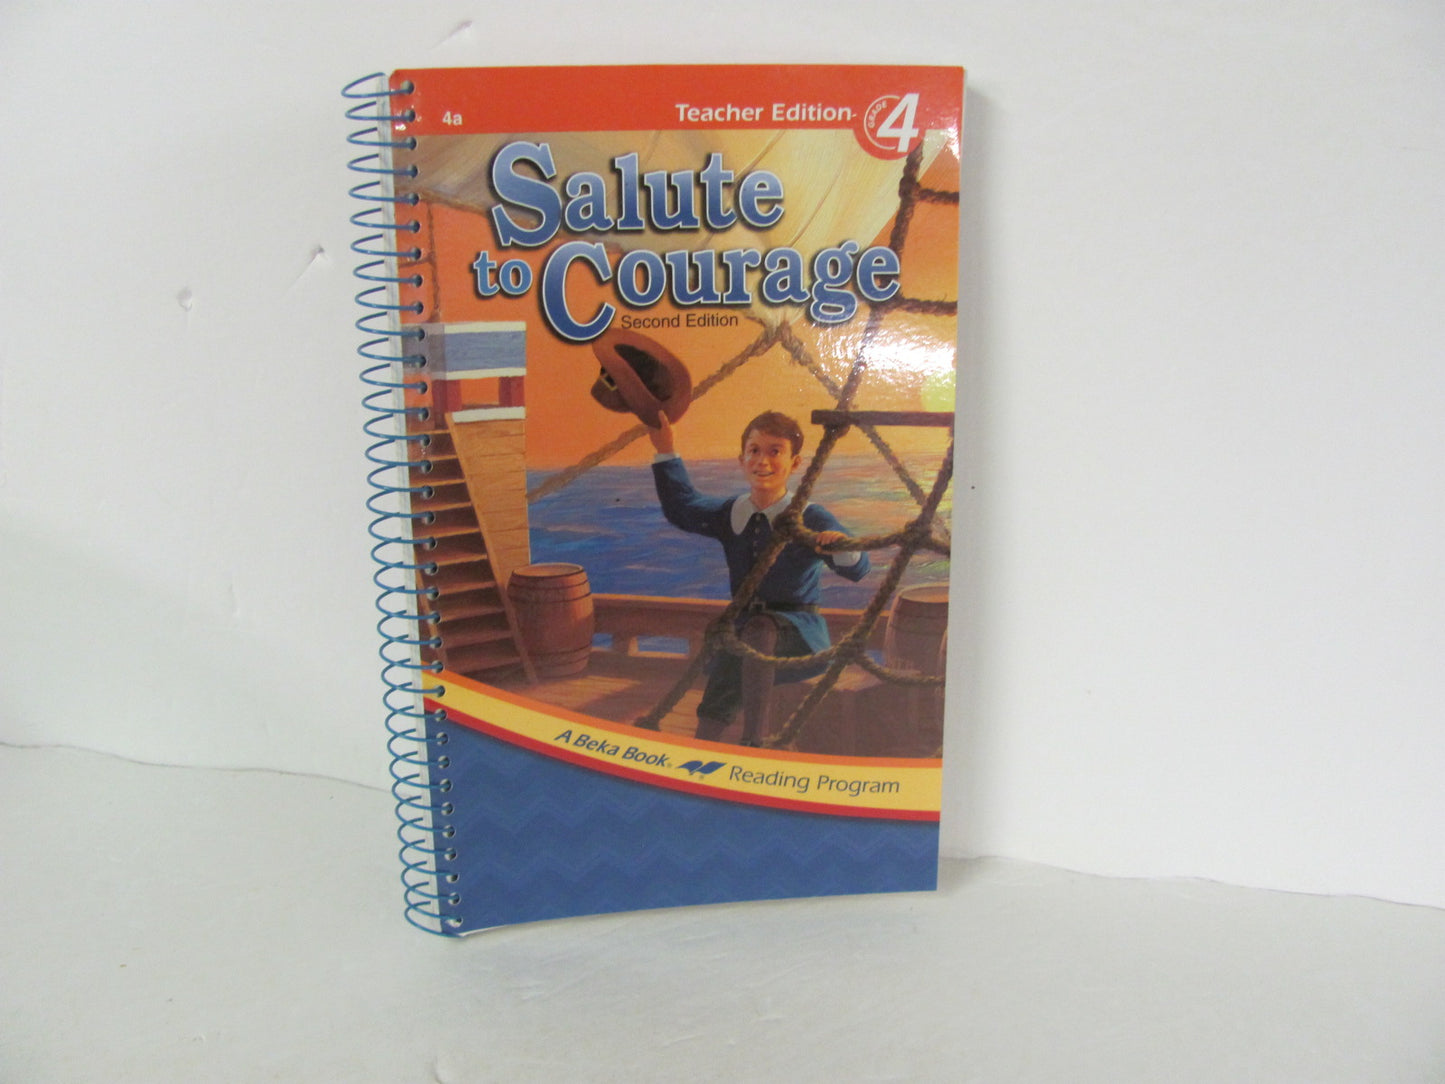 Salute to Courage Abeka Teacher Edition  Pre-Owned 4th Grade Reading Textbooks